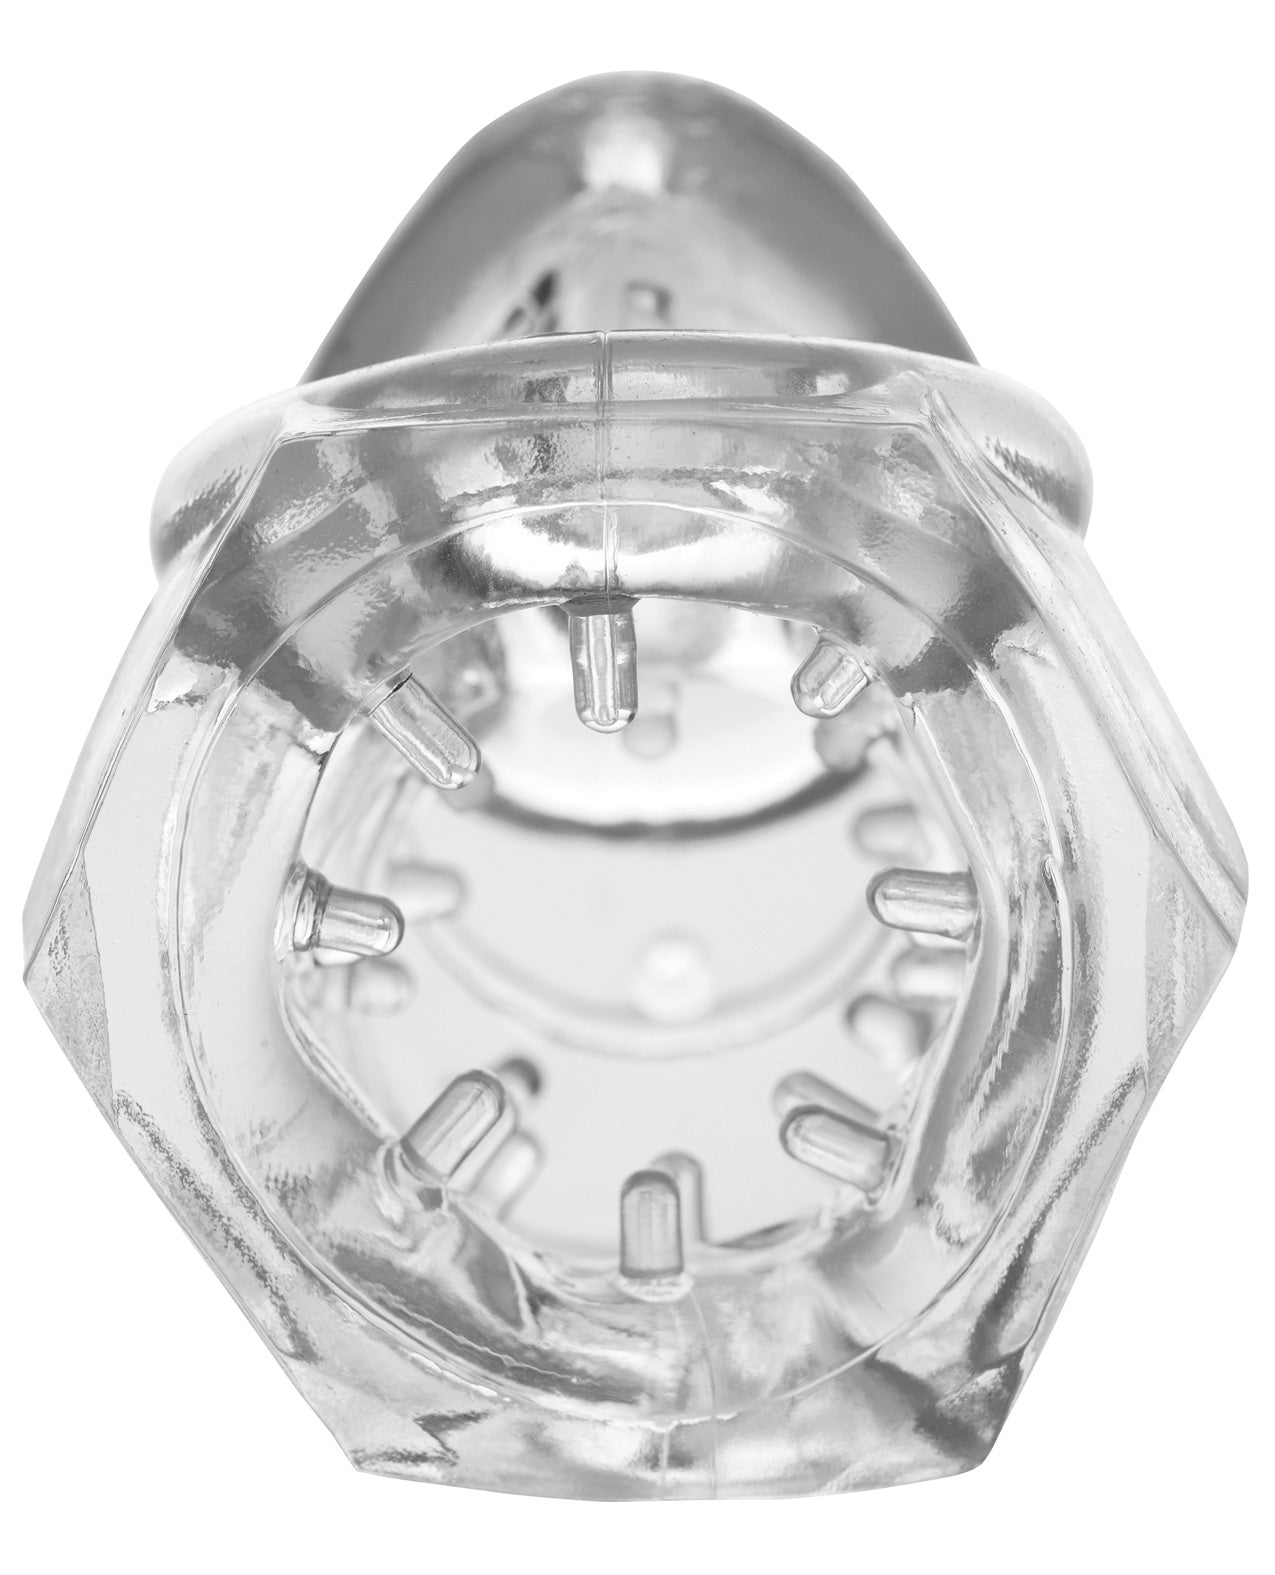 Master Series Detained 2.0 Restrictive Chastity Cage W-nubs - Clear - LUST Depot